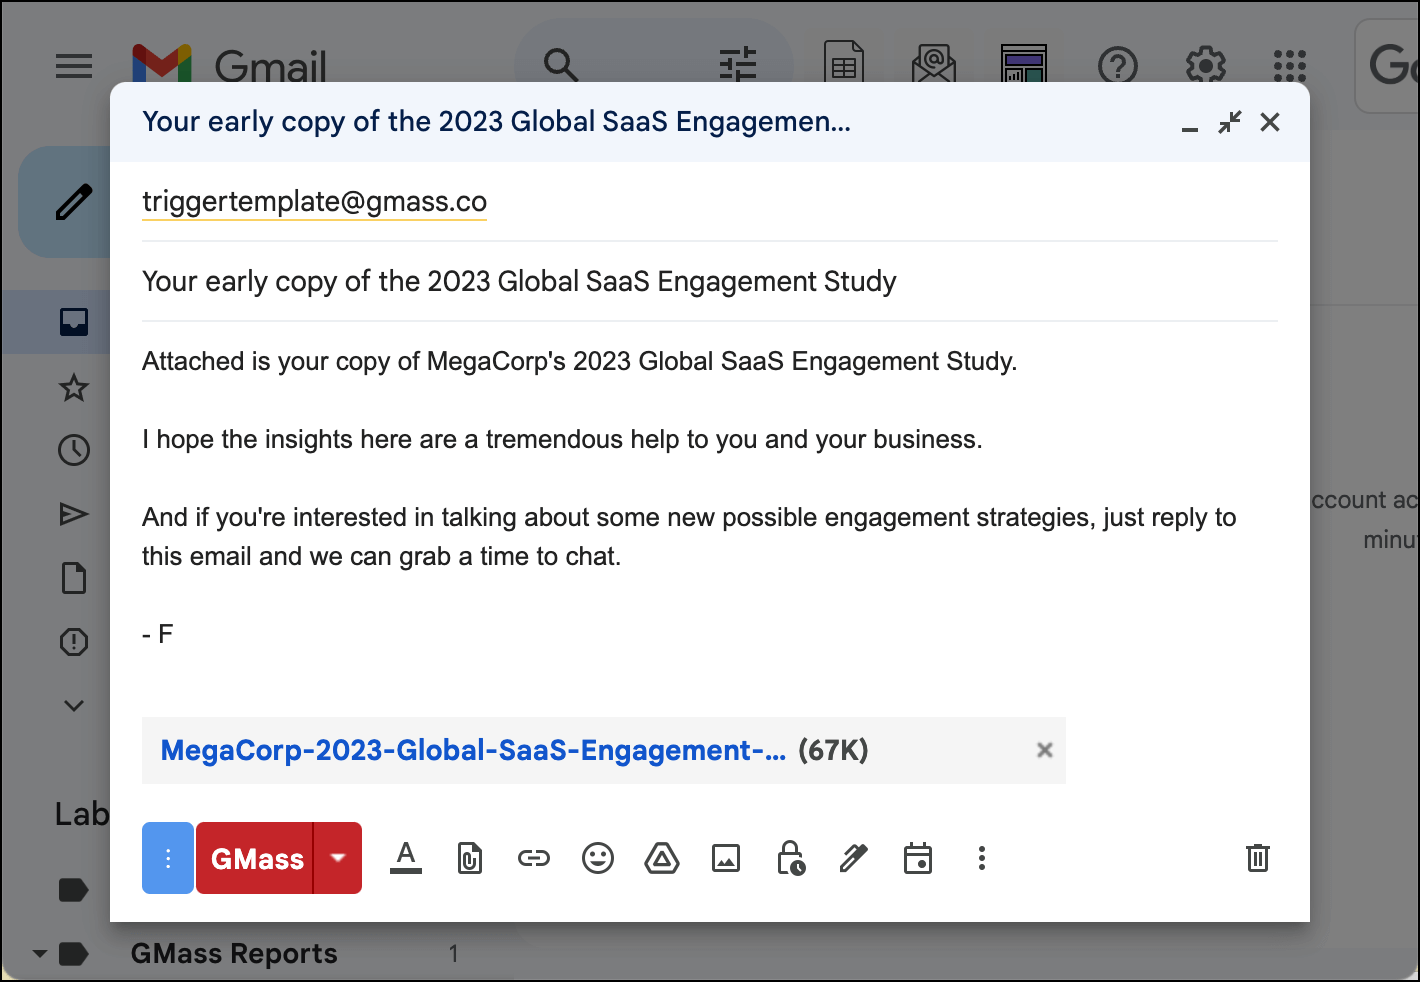 The triggered email with a PDF attached